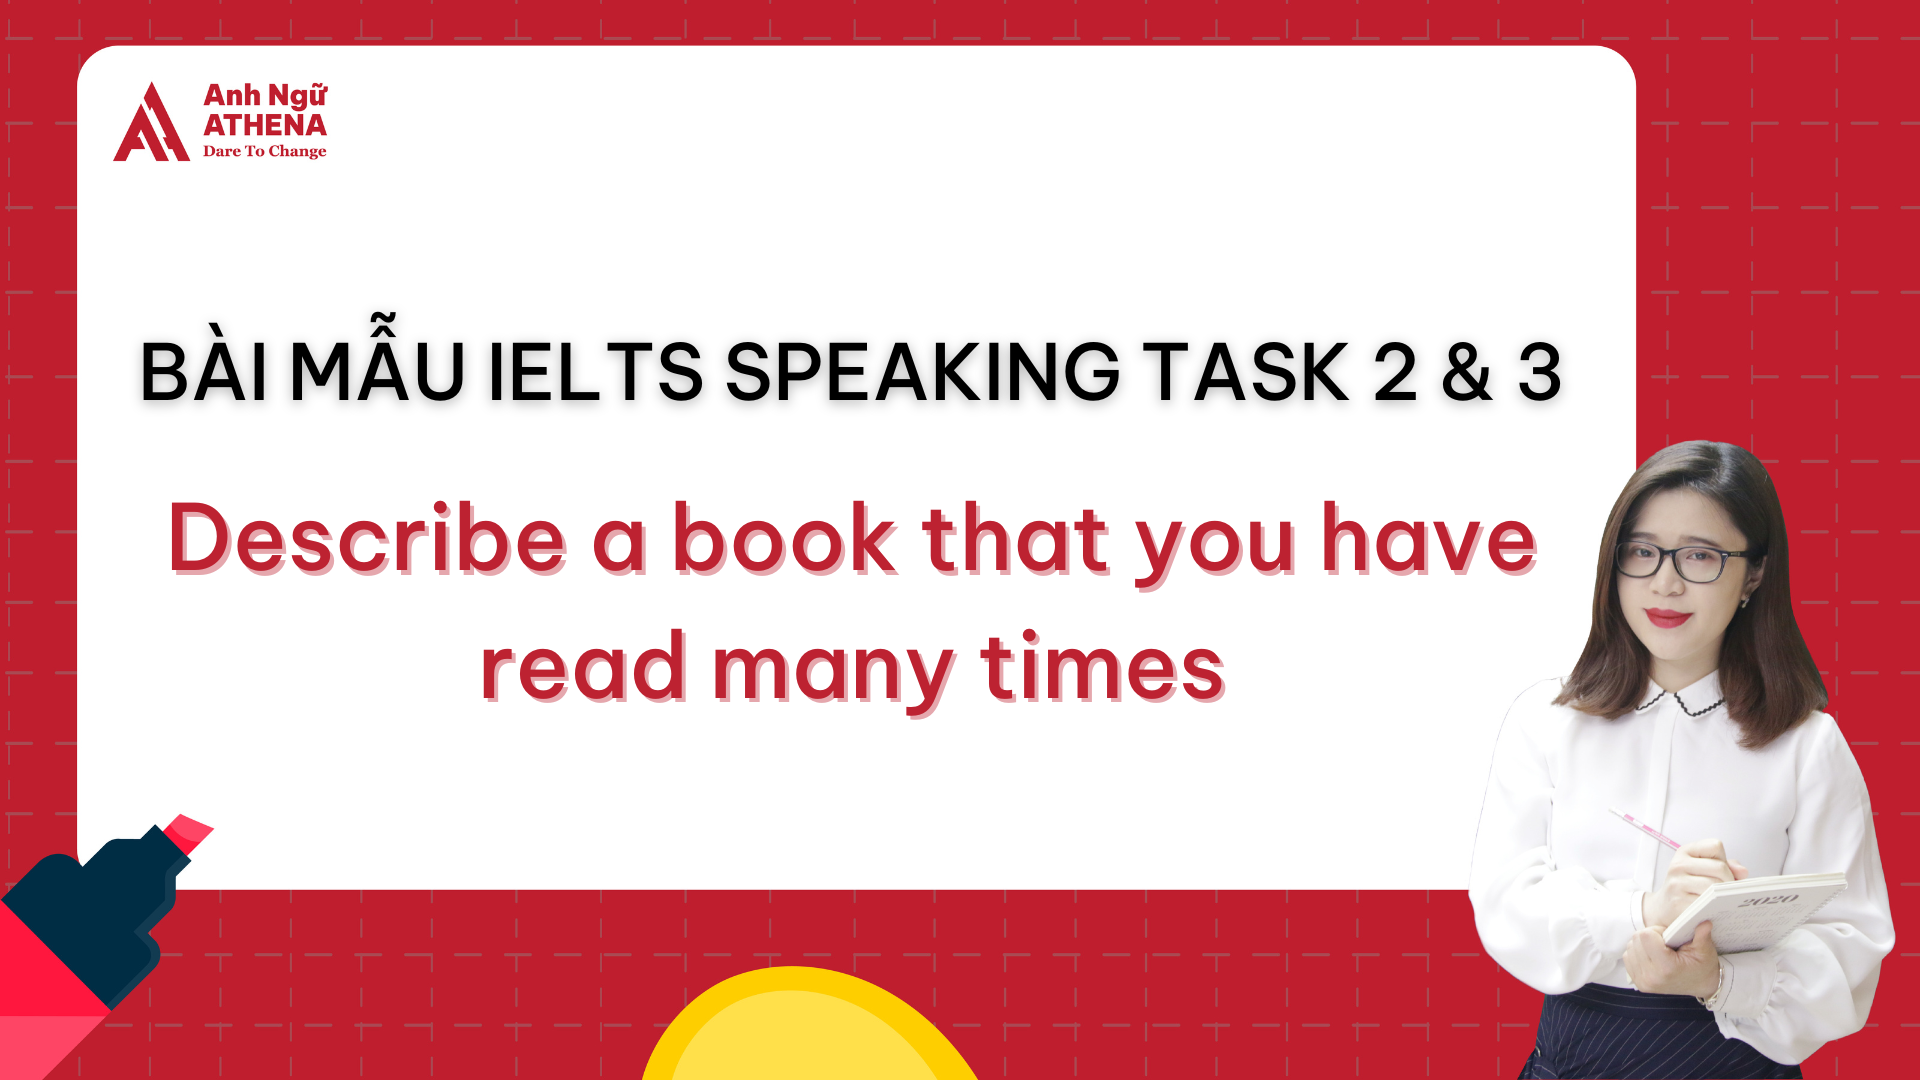 Bài mẫu IELTS Speaking Part 2 & 3 - Topic: Describe a book that you have read many times